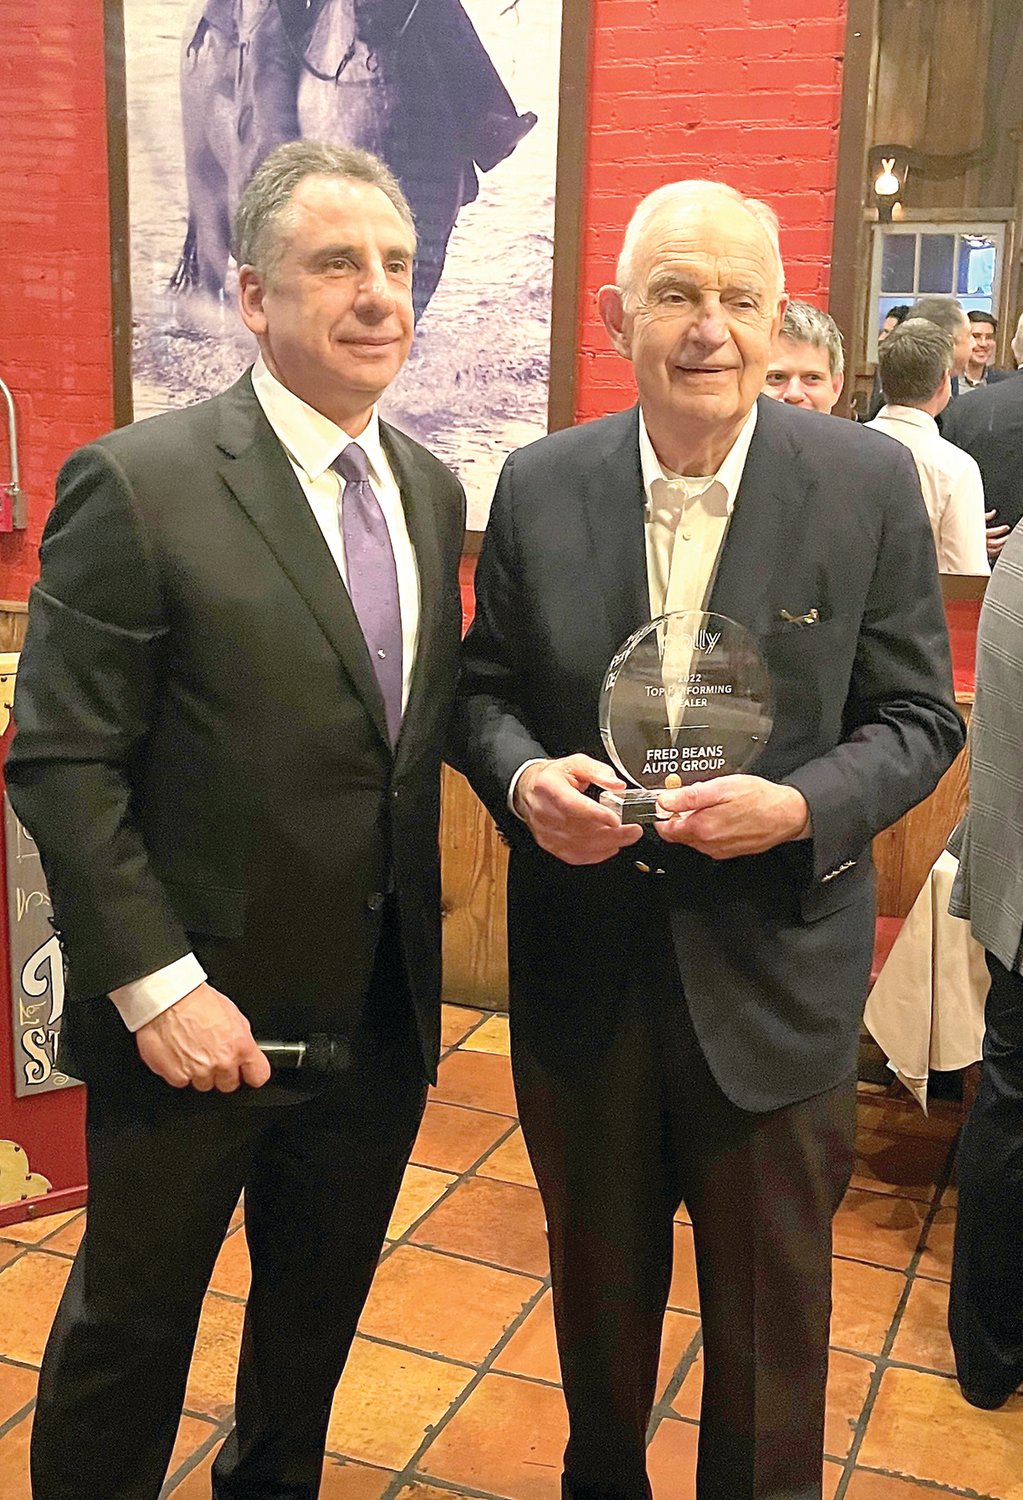 Wayne Pastore, COO and president of distribution for Polly, left, presents the Top Performing Dealer of the Year award to Fred Beans.